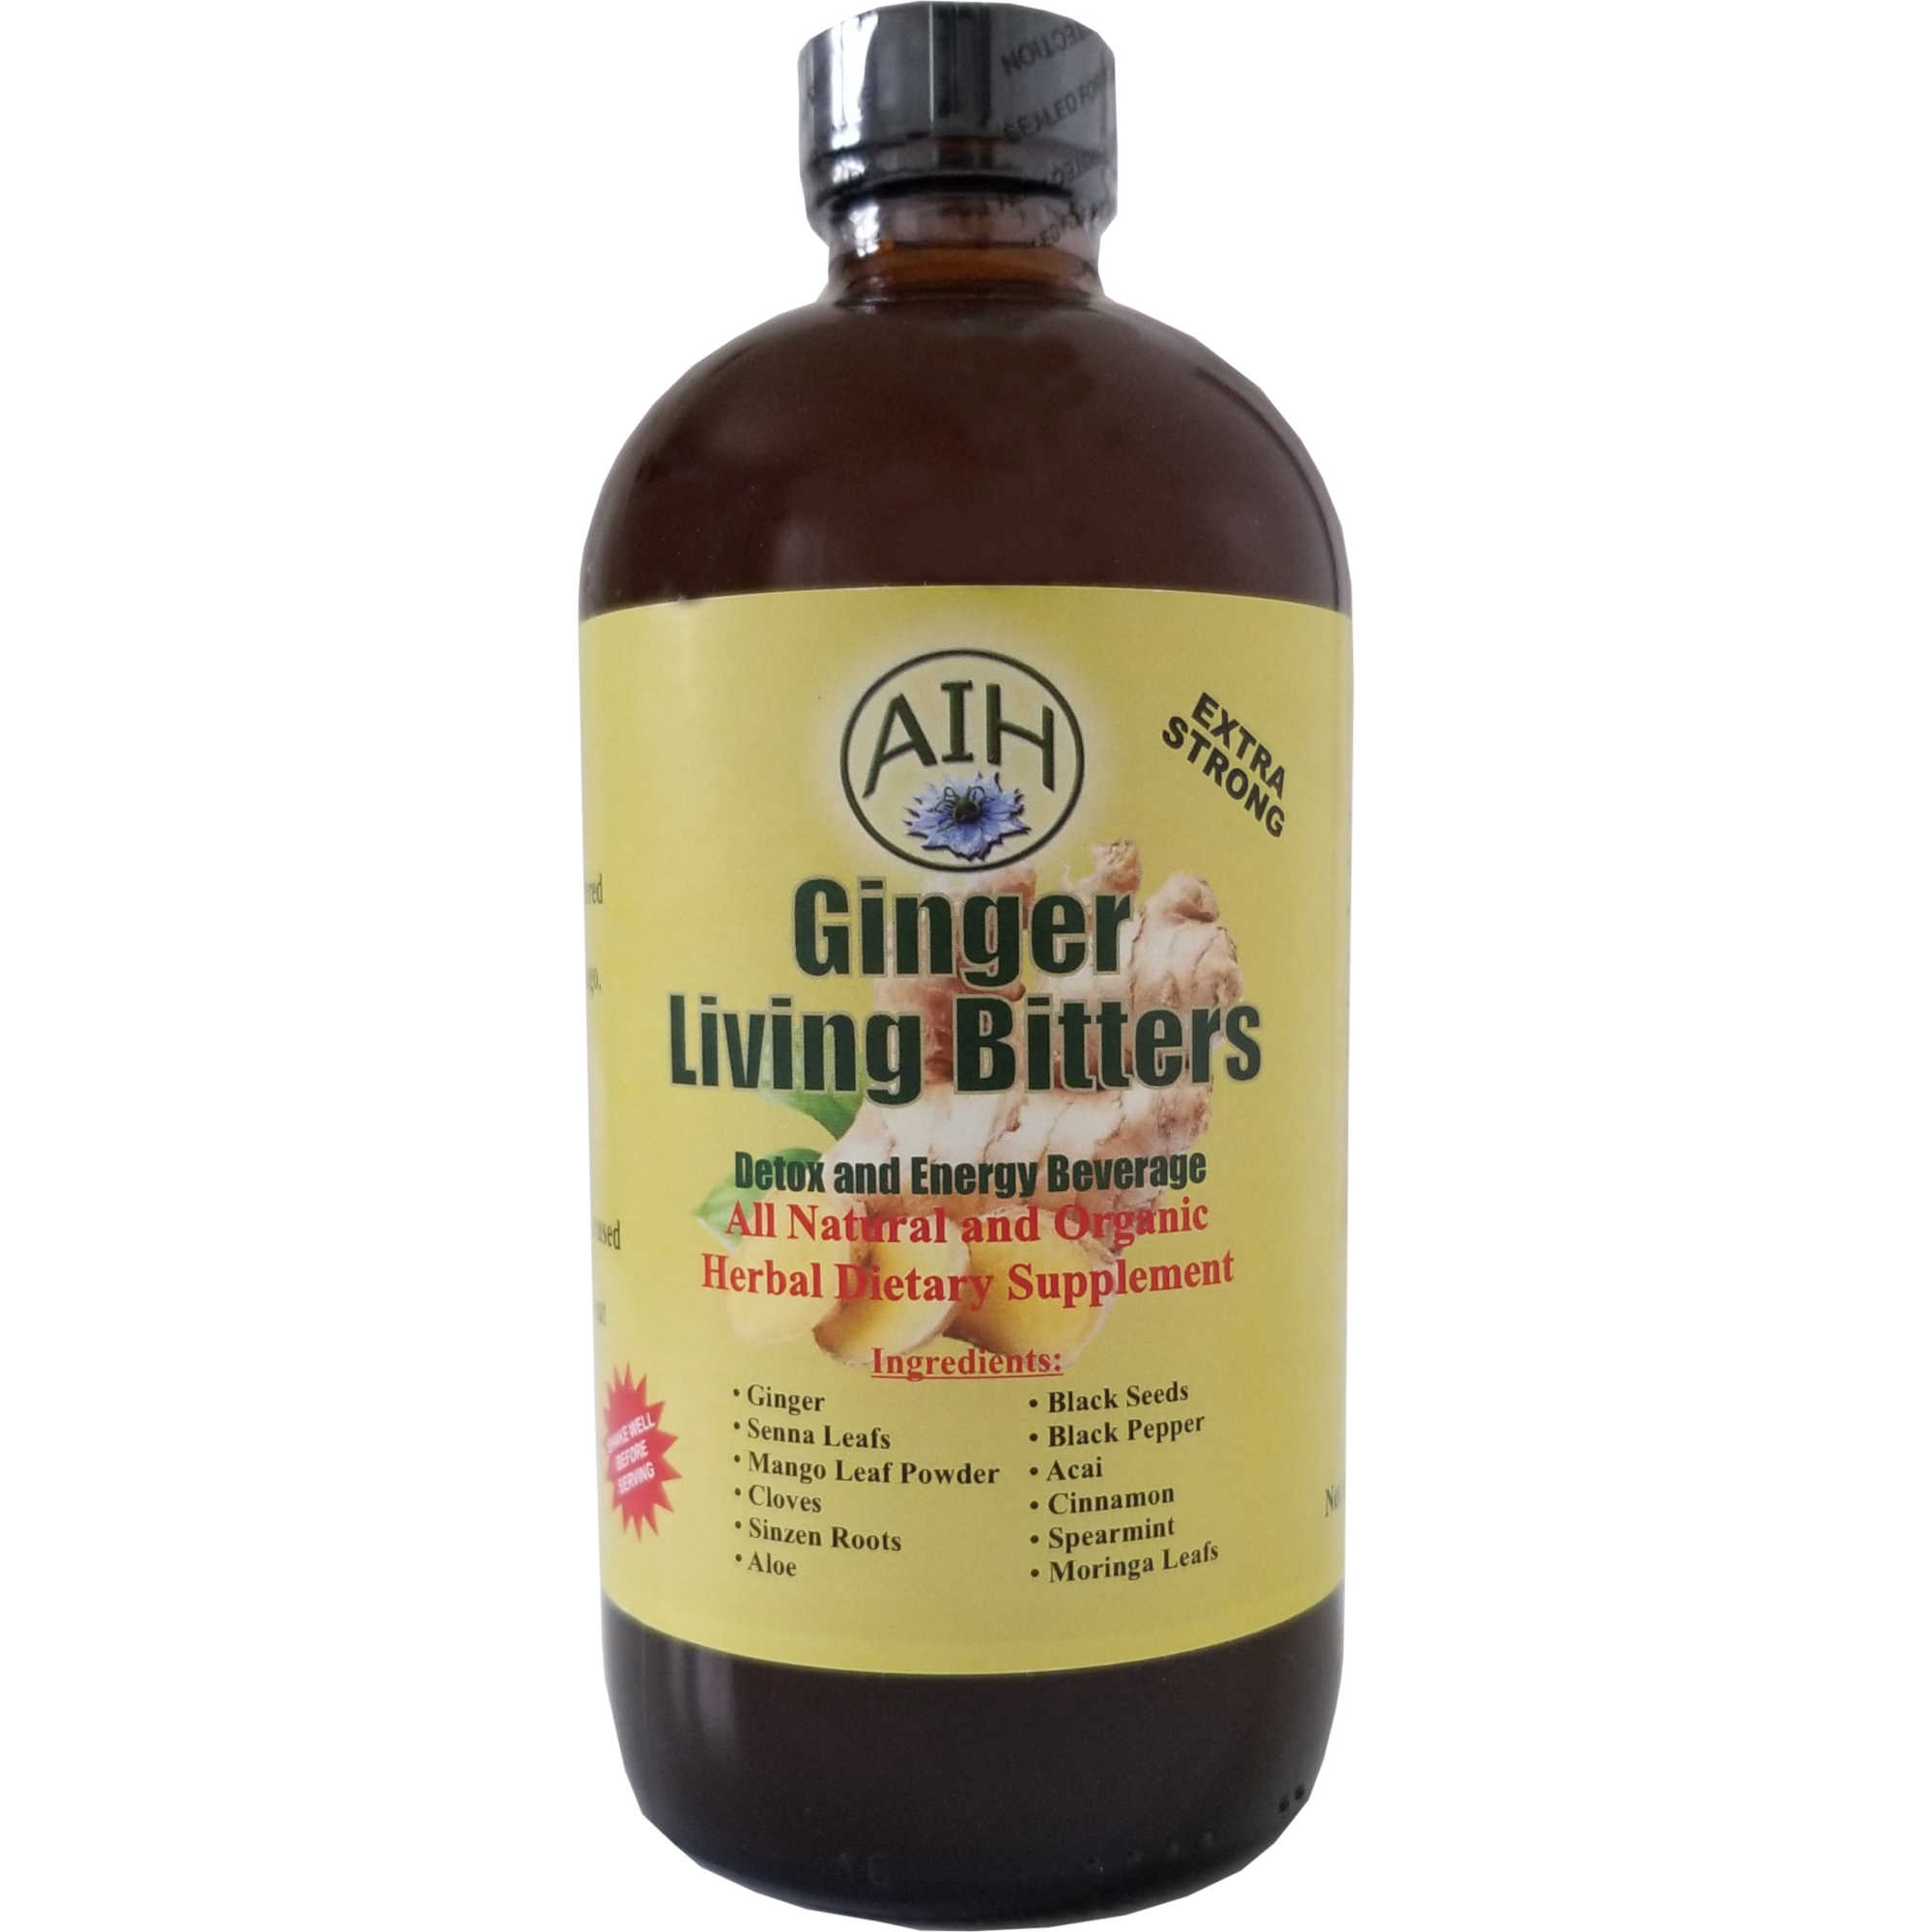 AIH Ginger Living Bitters Extra Strong Detox and Energy Beverage Front